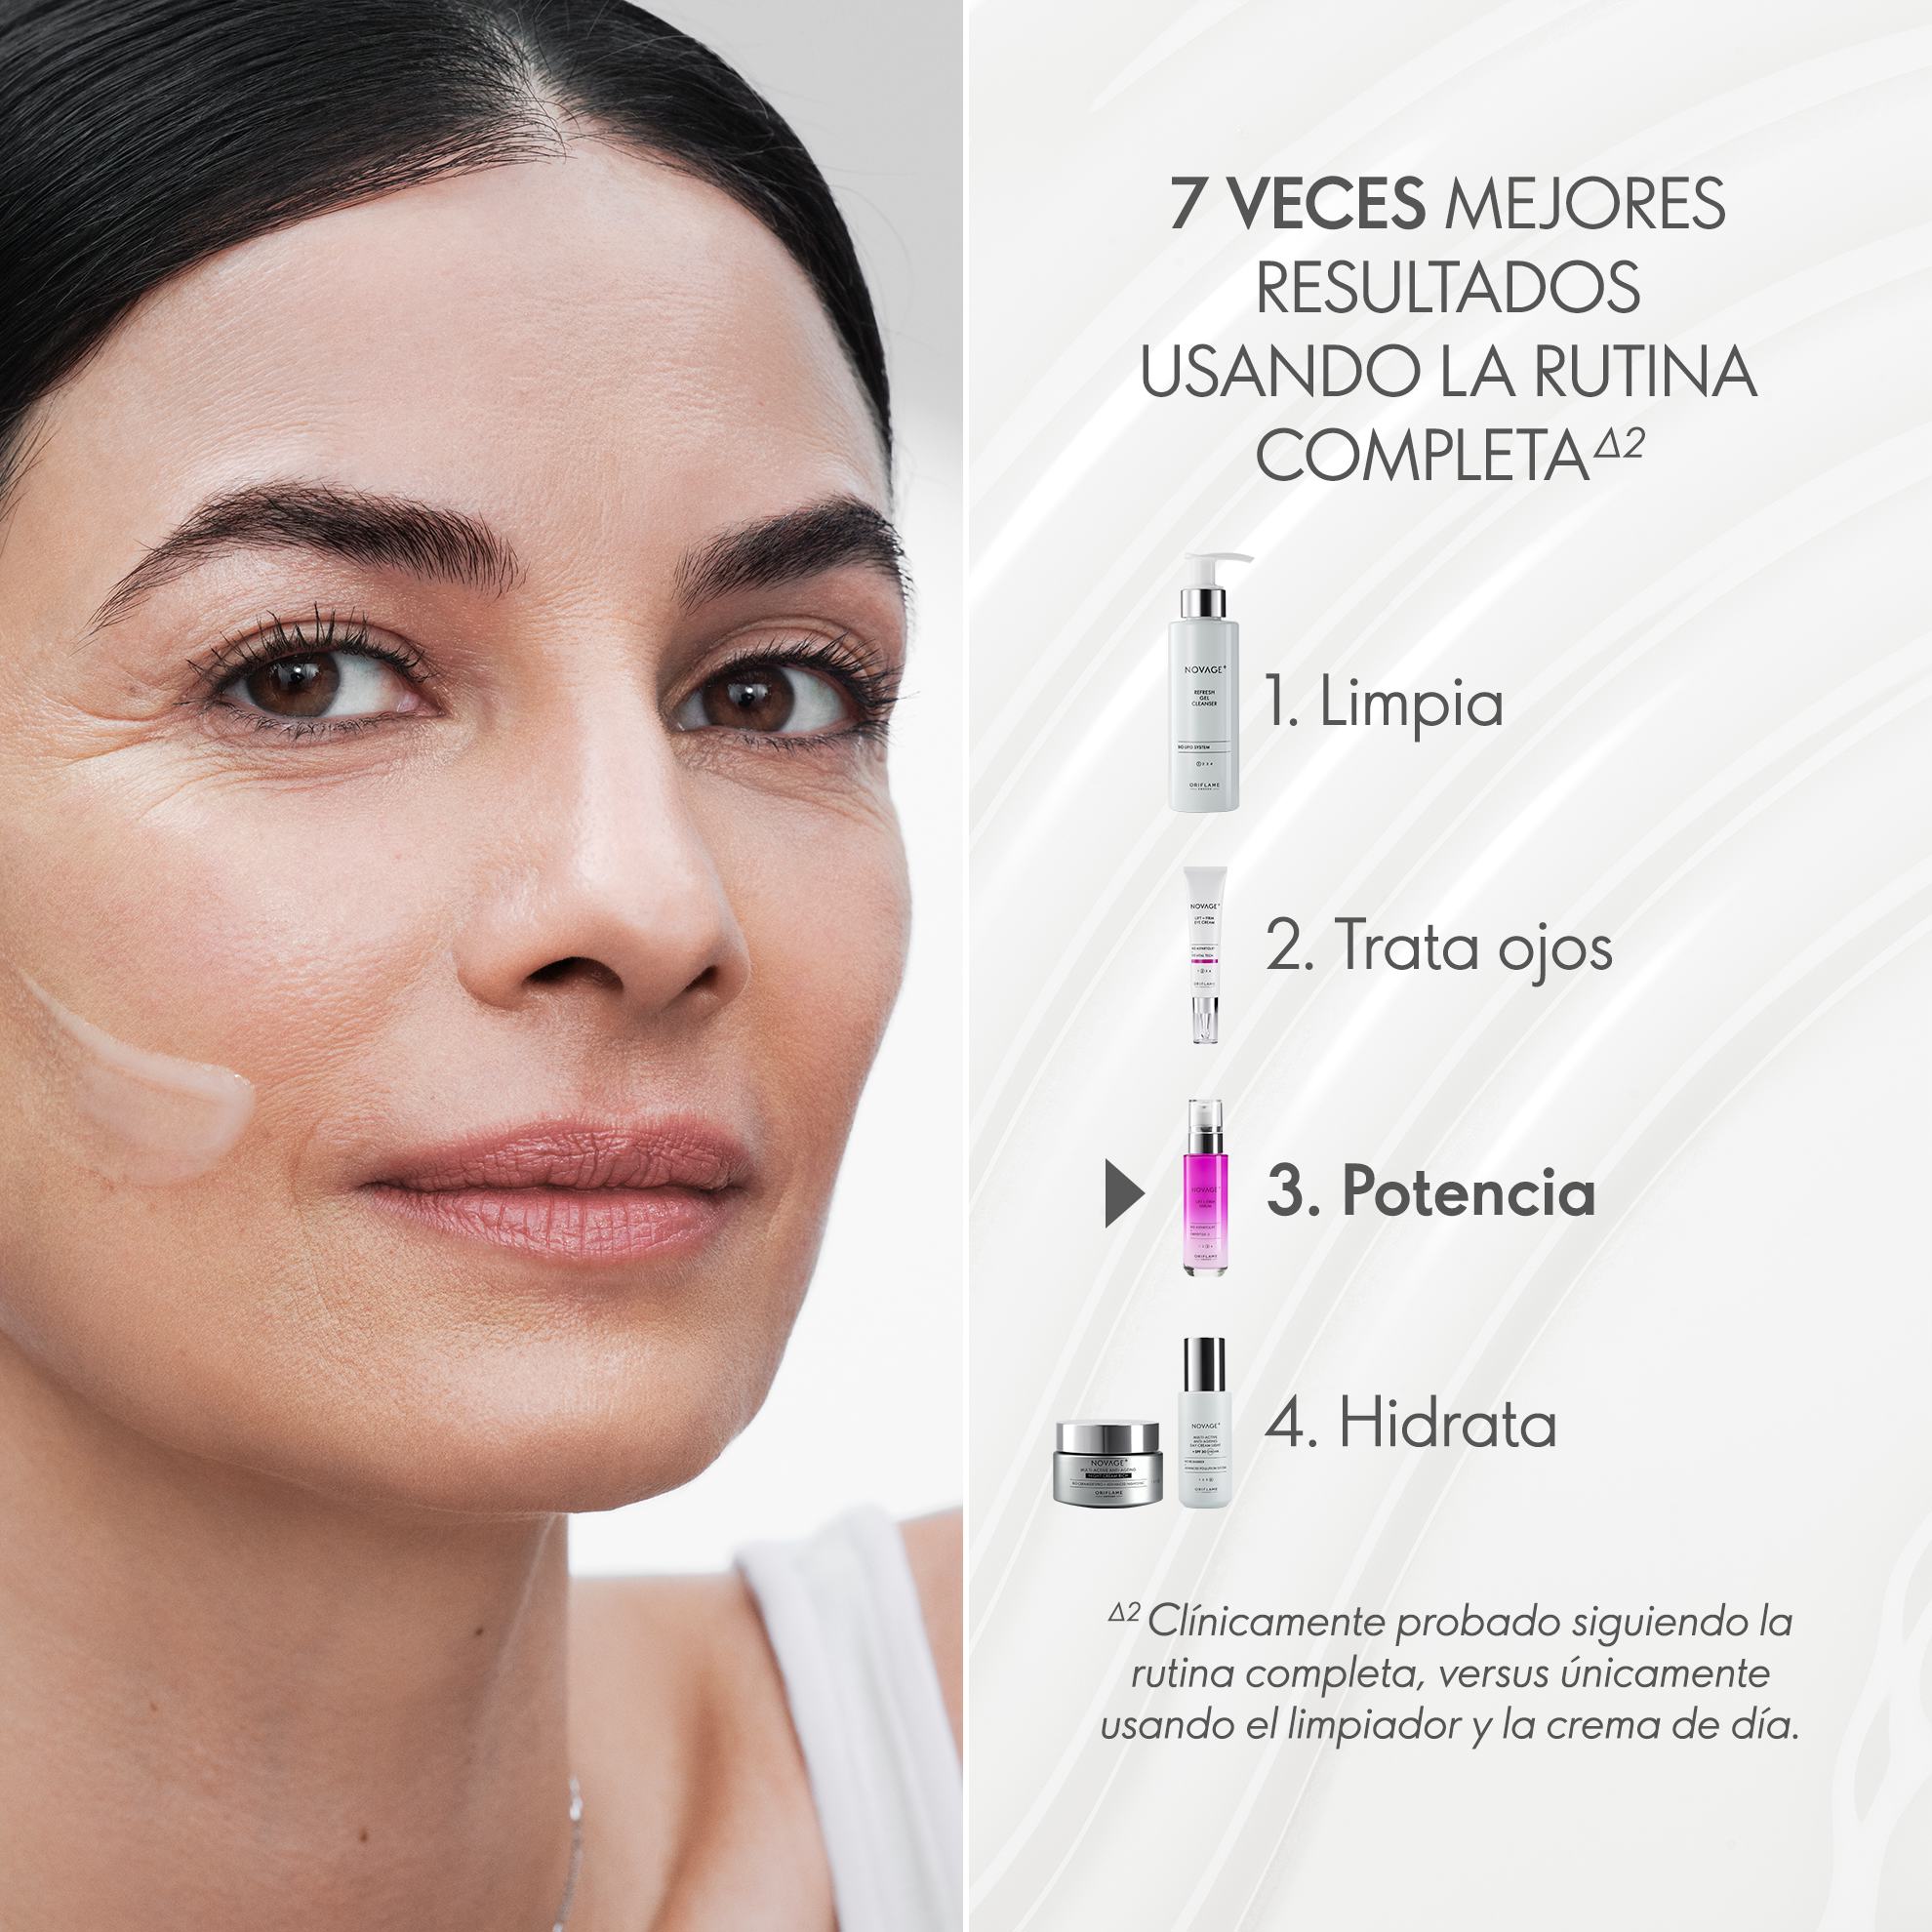 https://media-cdn.oriflame.com/productImage?externalMediaId=product-management-media%2fProducts%2f41037%2fCO%2f41037_5.png&id=18234936&version=1